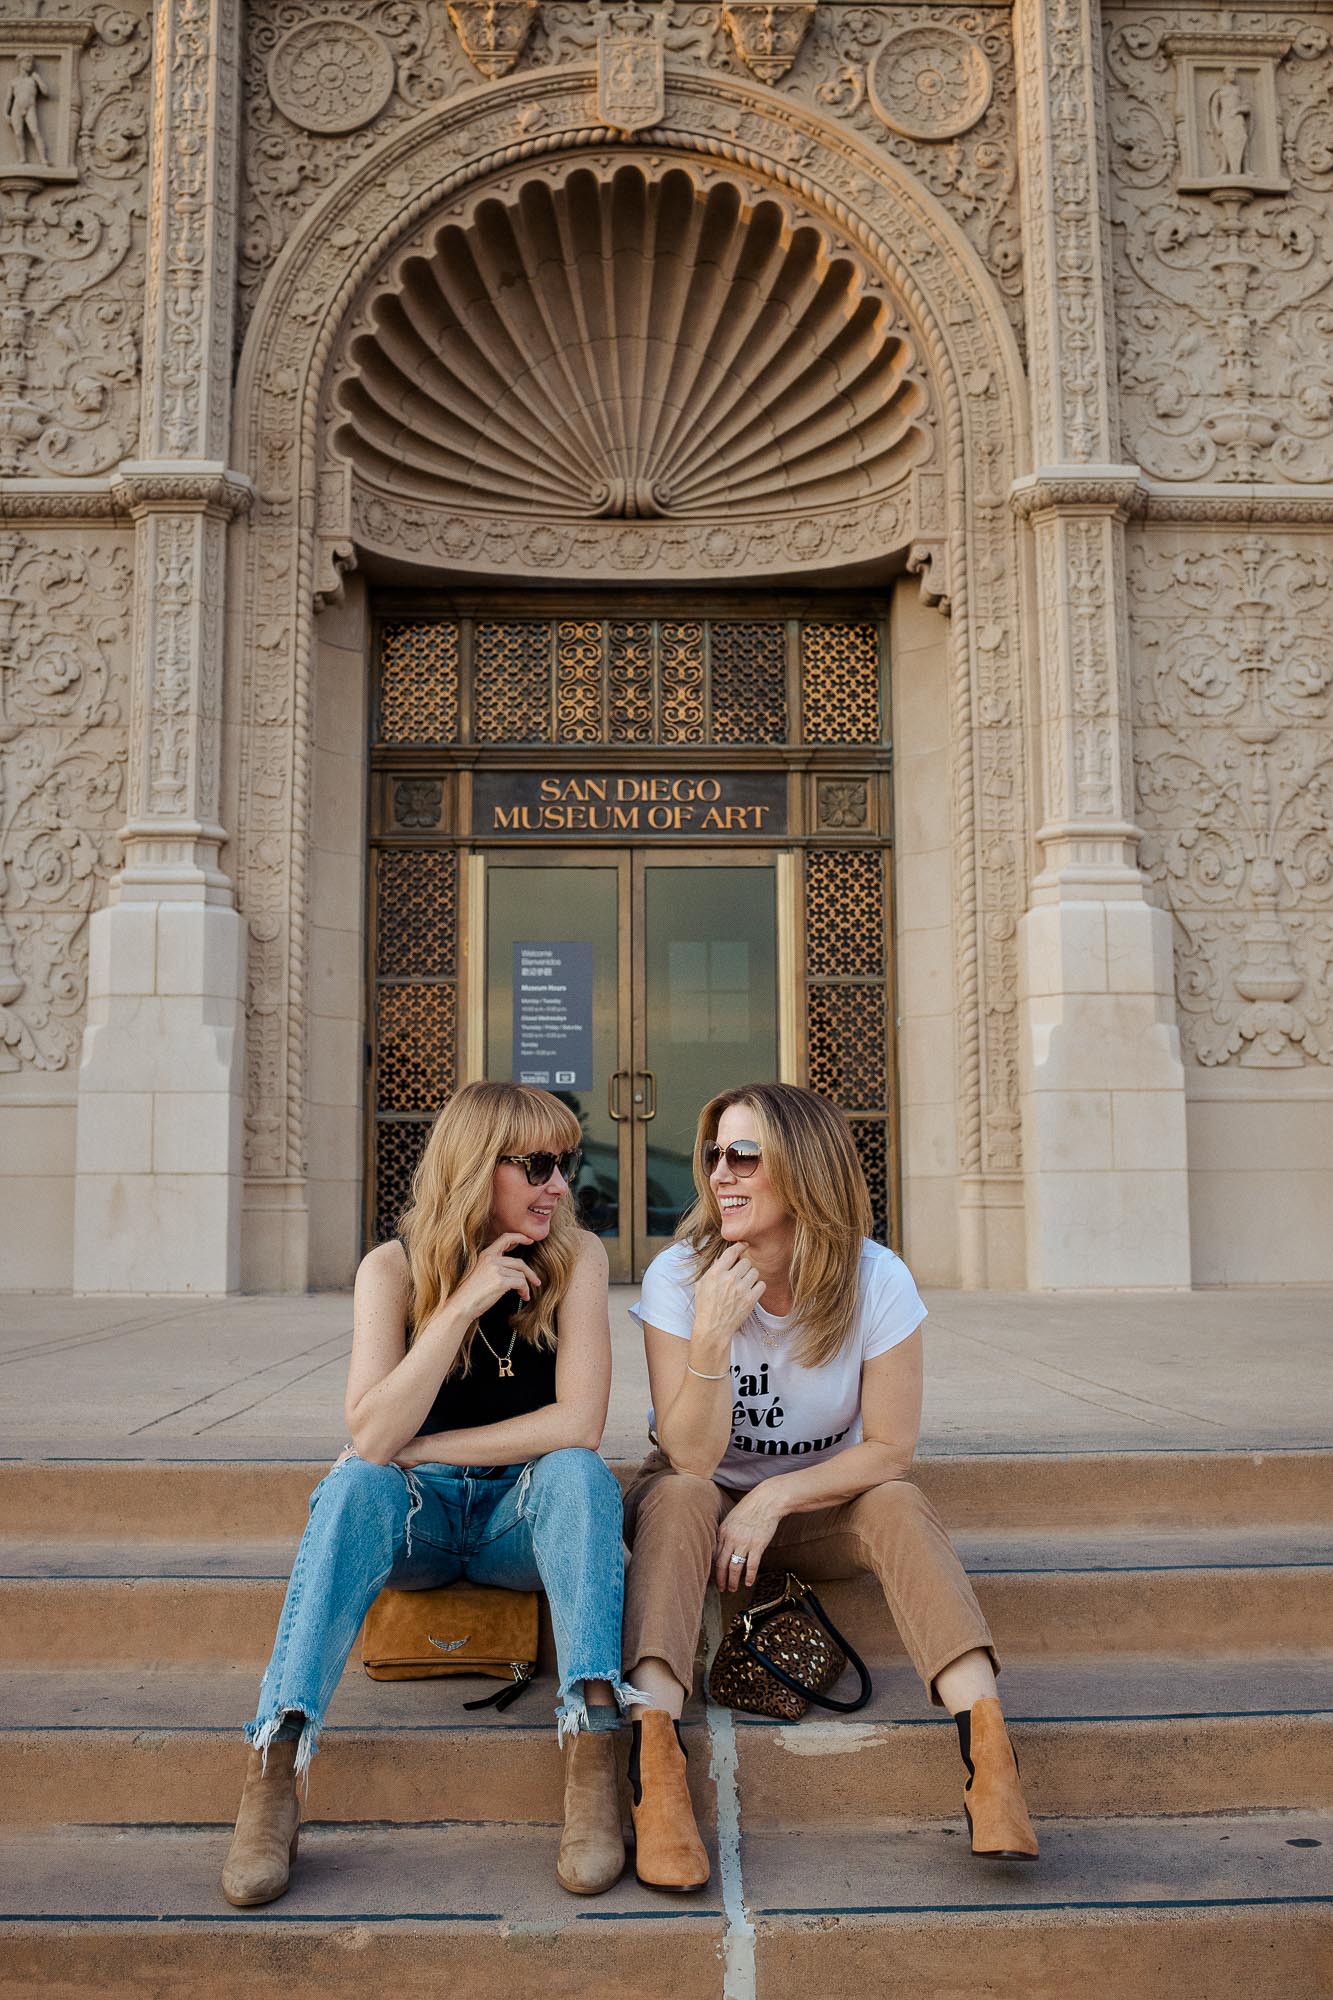 Wearing our Marla Aaron necklaces in Balboa Park.